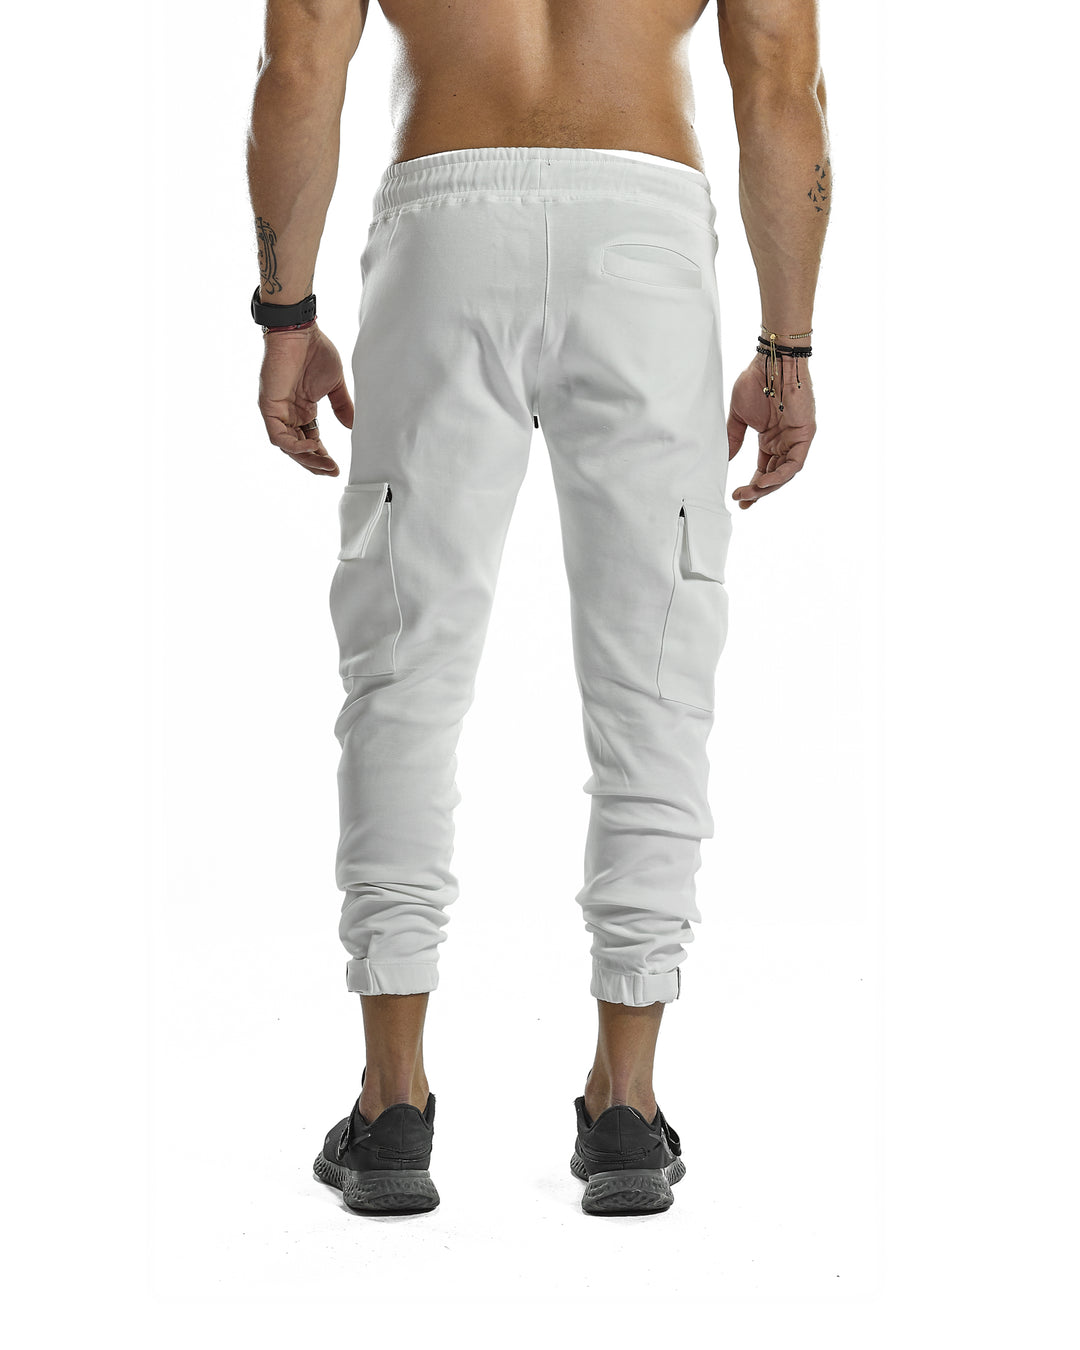 Cargo Joggers - ULTRA Perform-Gear [White] - Sweatpants/Joggers - Gym Apparel Egypt